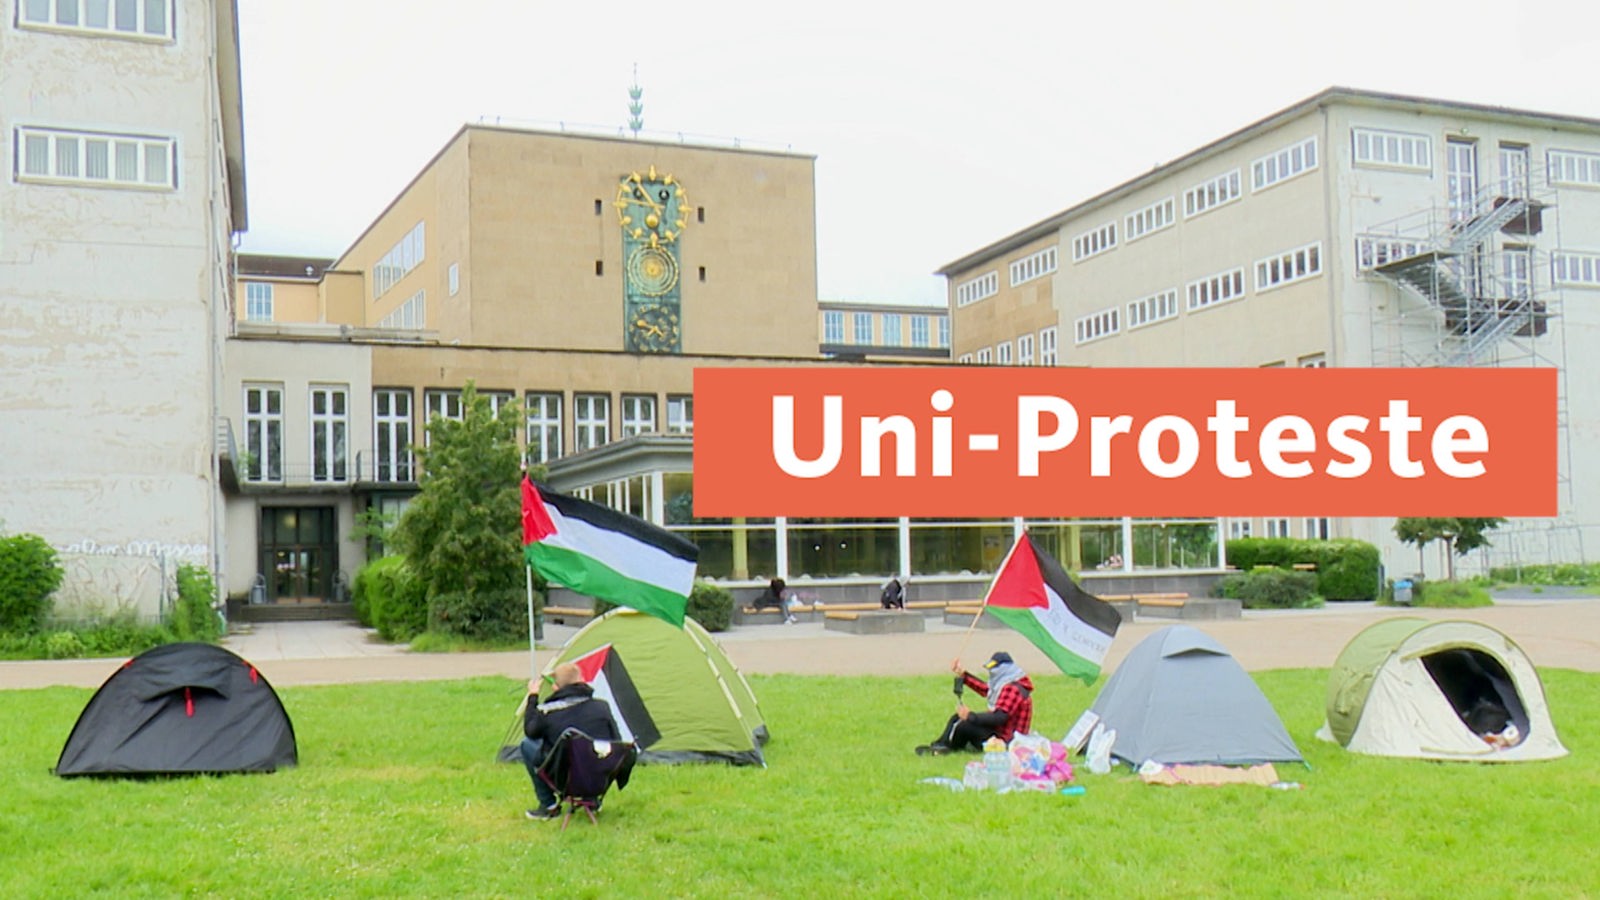 Protests at universities: criticism of Israel or anti-Semitism?  – News